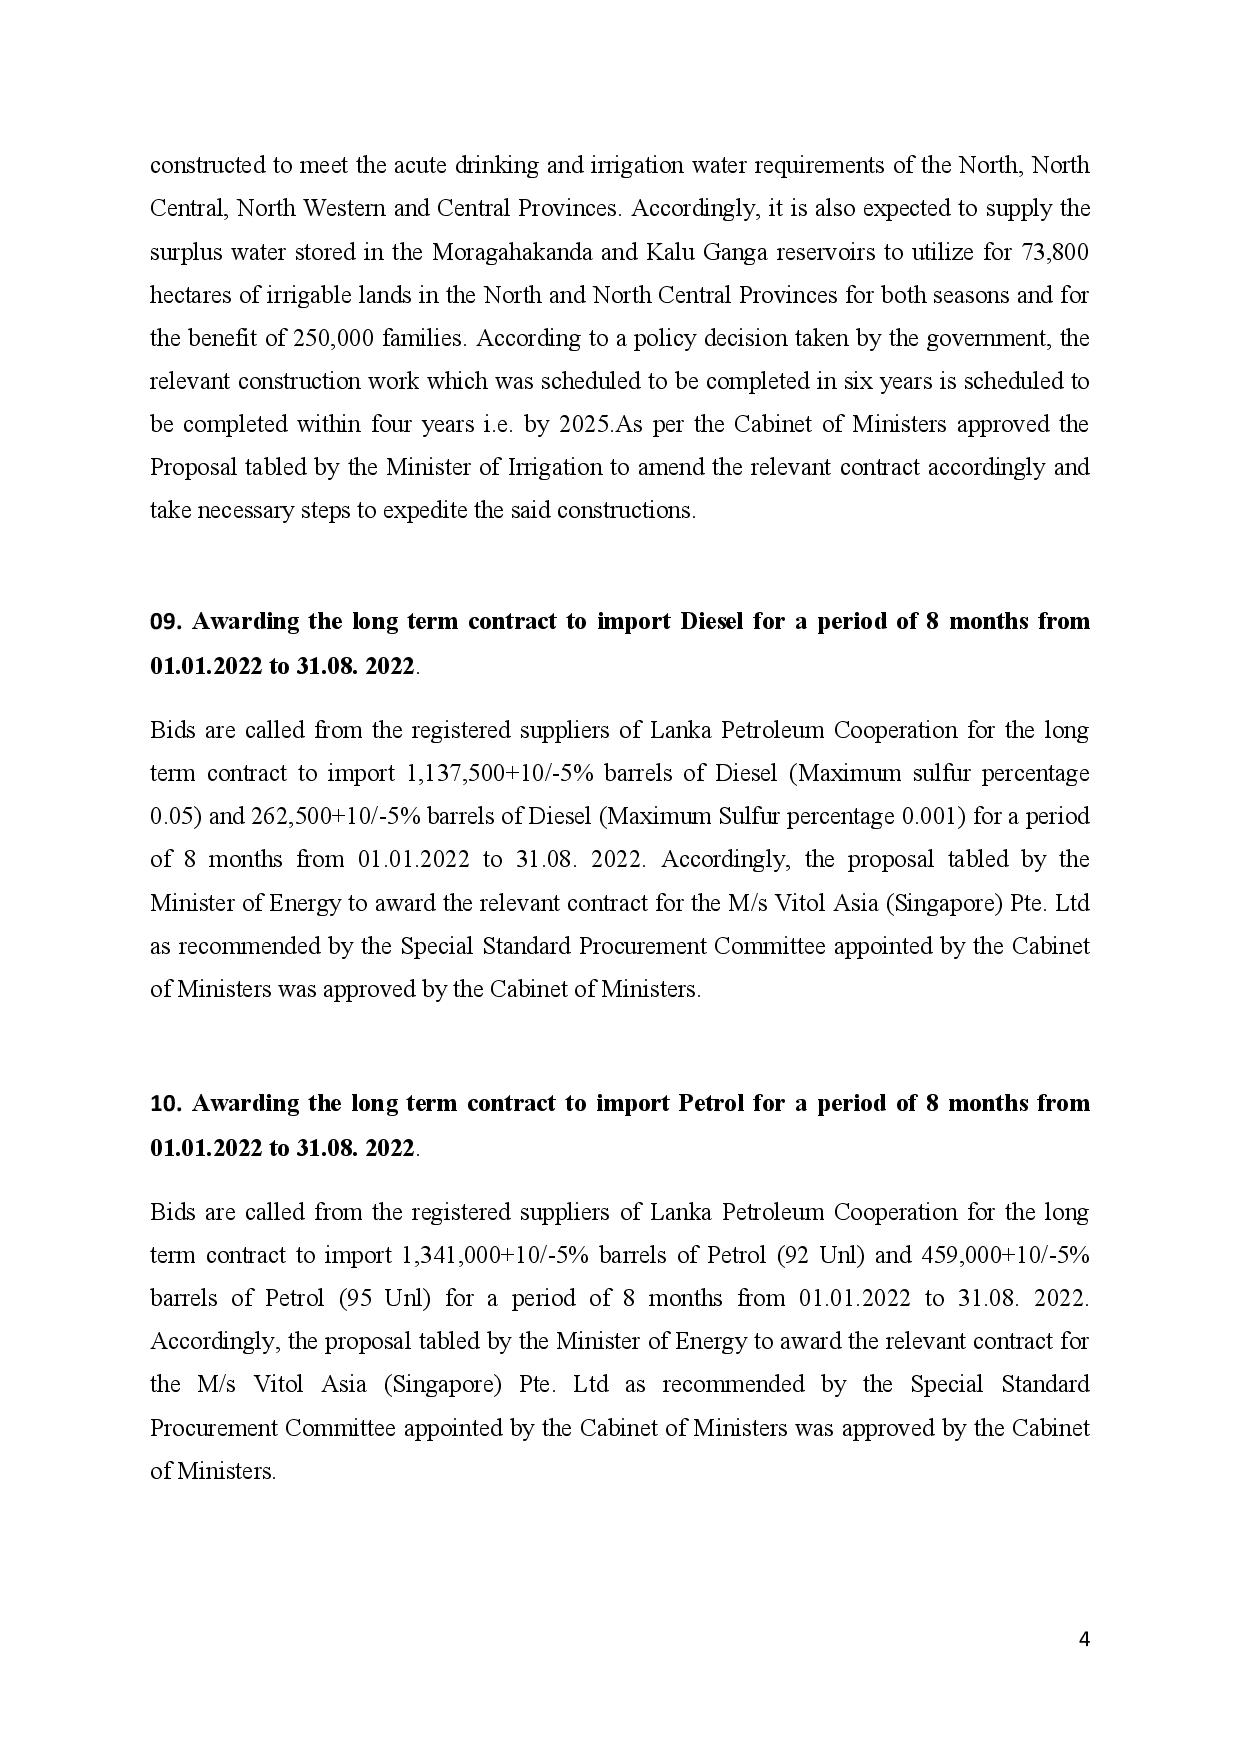 Cabinet Decisions on 25.10.2021 E page 004